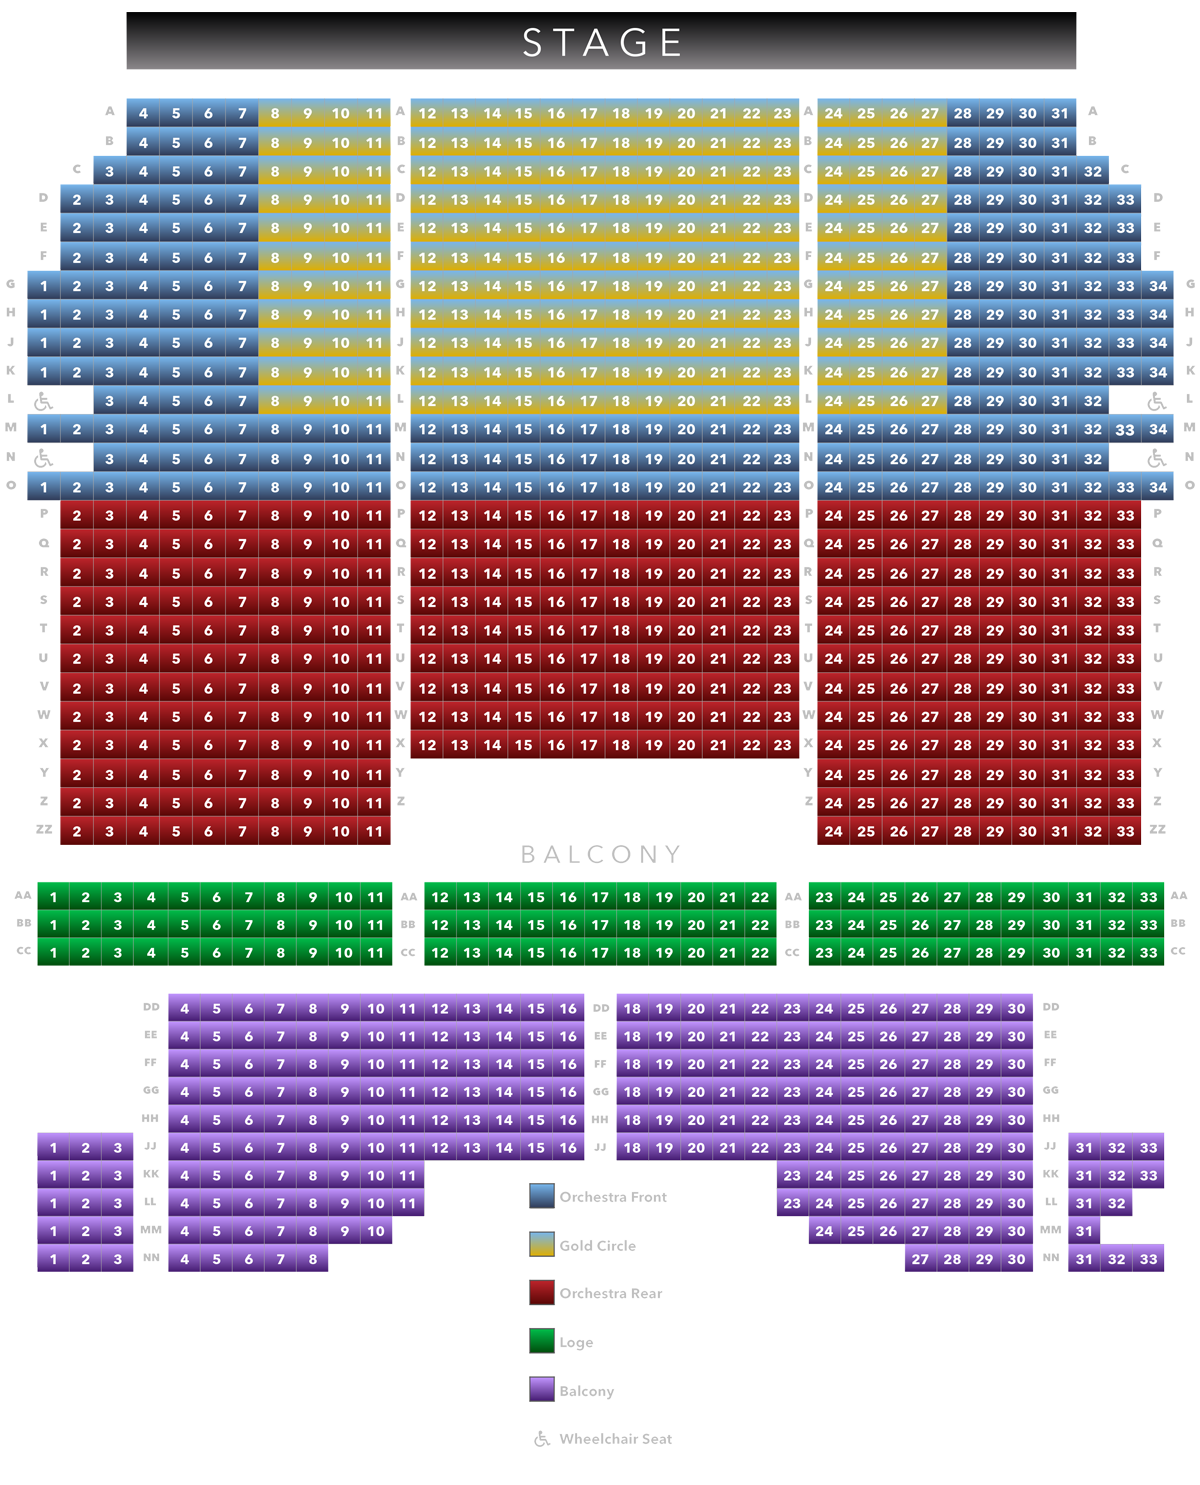 riviera theatre chicago seating chart related keywords. riviera theatre...